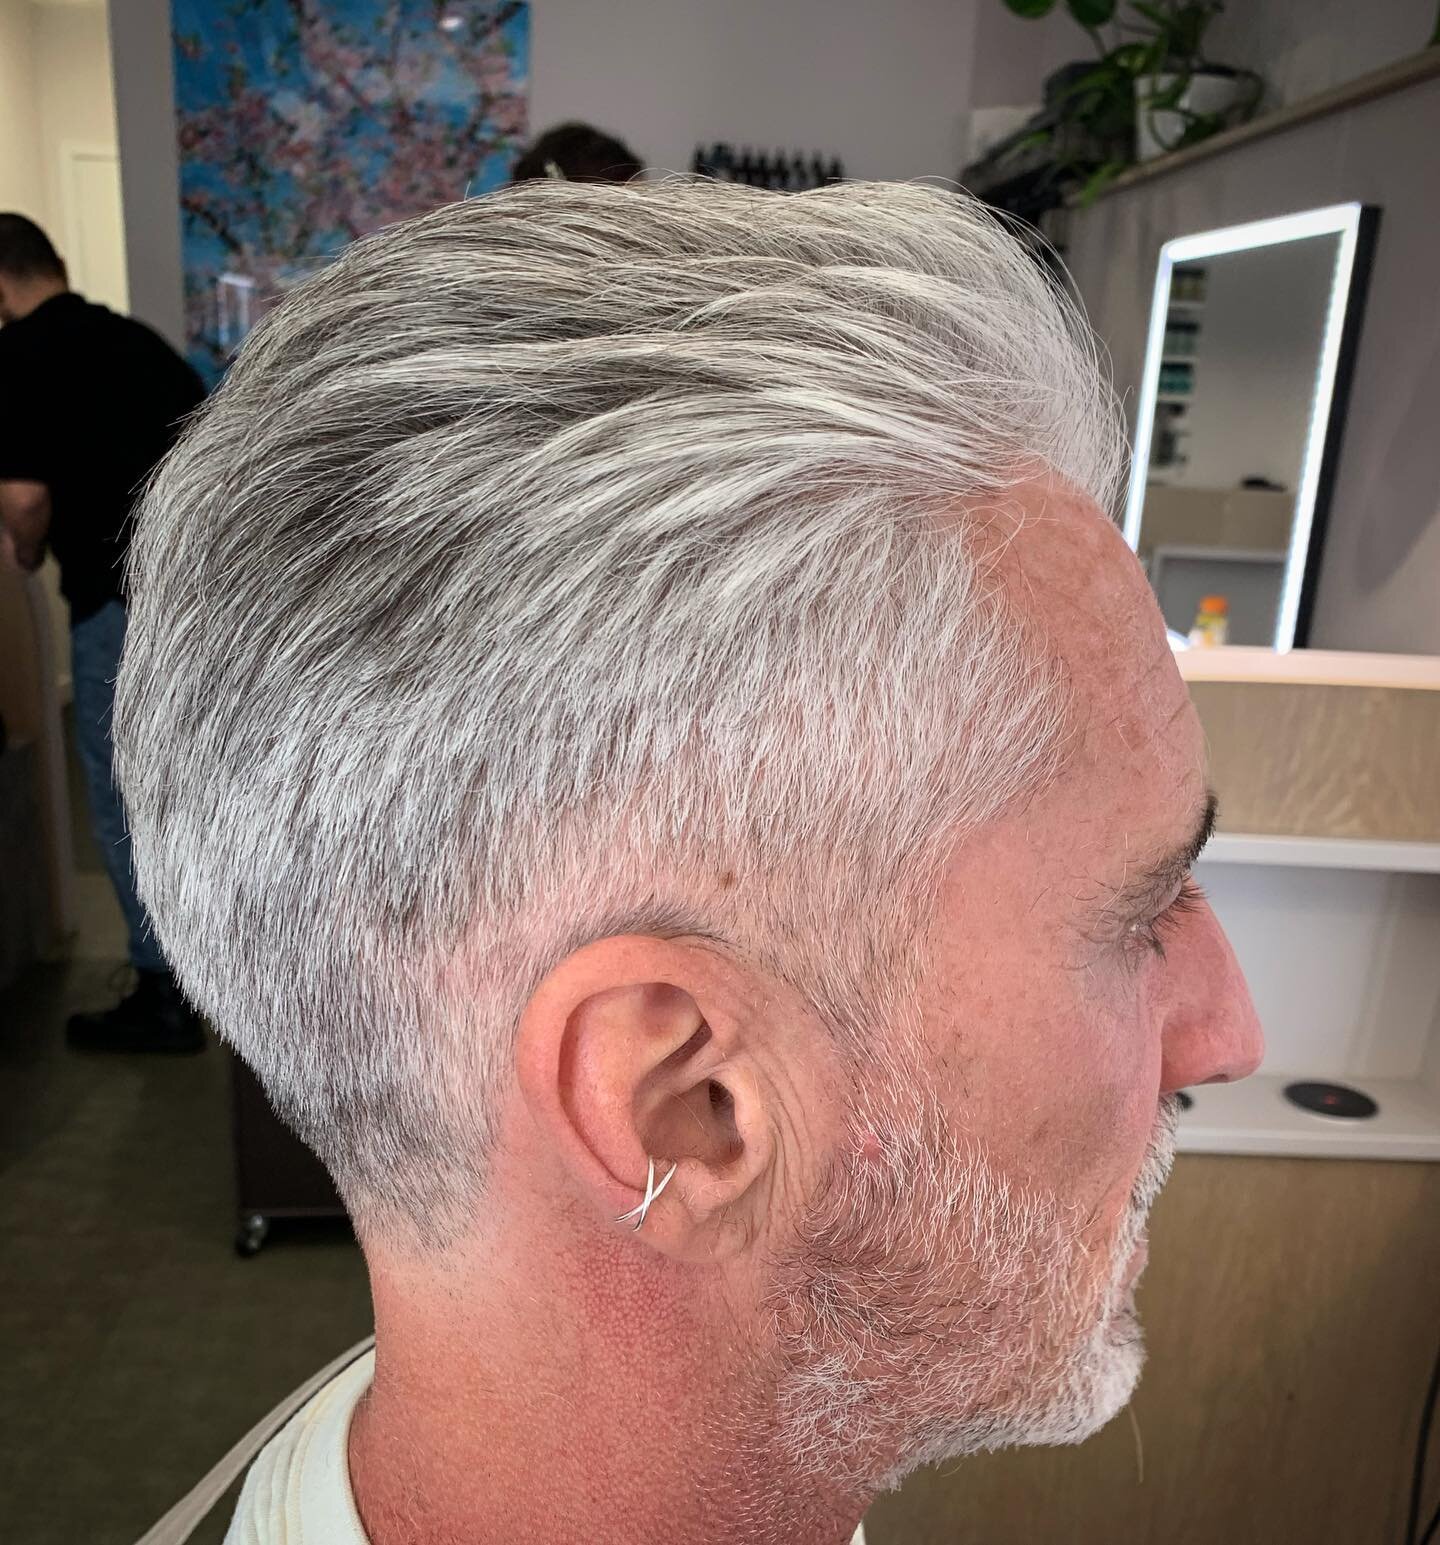 Our silver fox Paolo! Great to see you amico 😘 #silverhair #whitehair #shorthaircut #tanticapelli #menscut #shorthairstyle #sharpshorthair @finipaolo_ @yogaruna